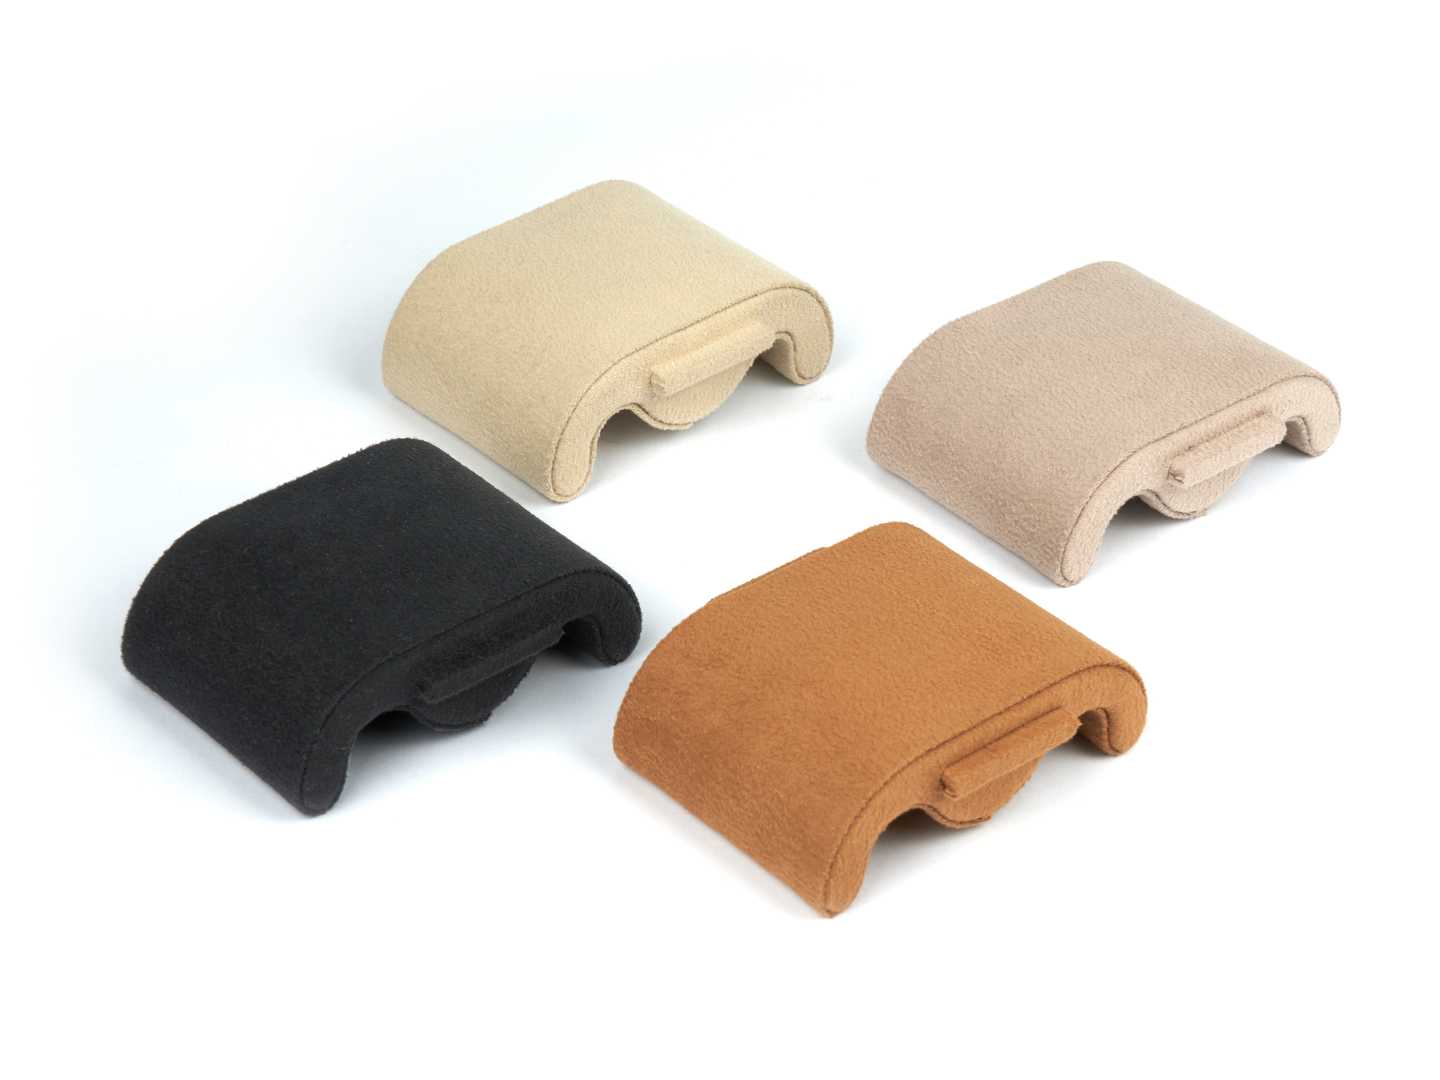 Small Wrist Watch Cushions - Small Pillows For Carapaz Watch Cases